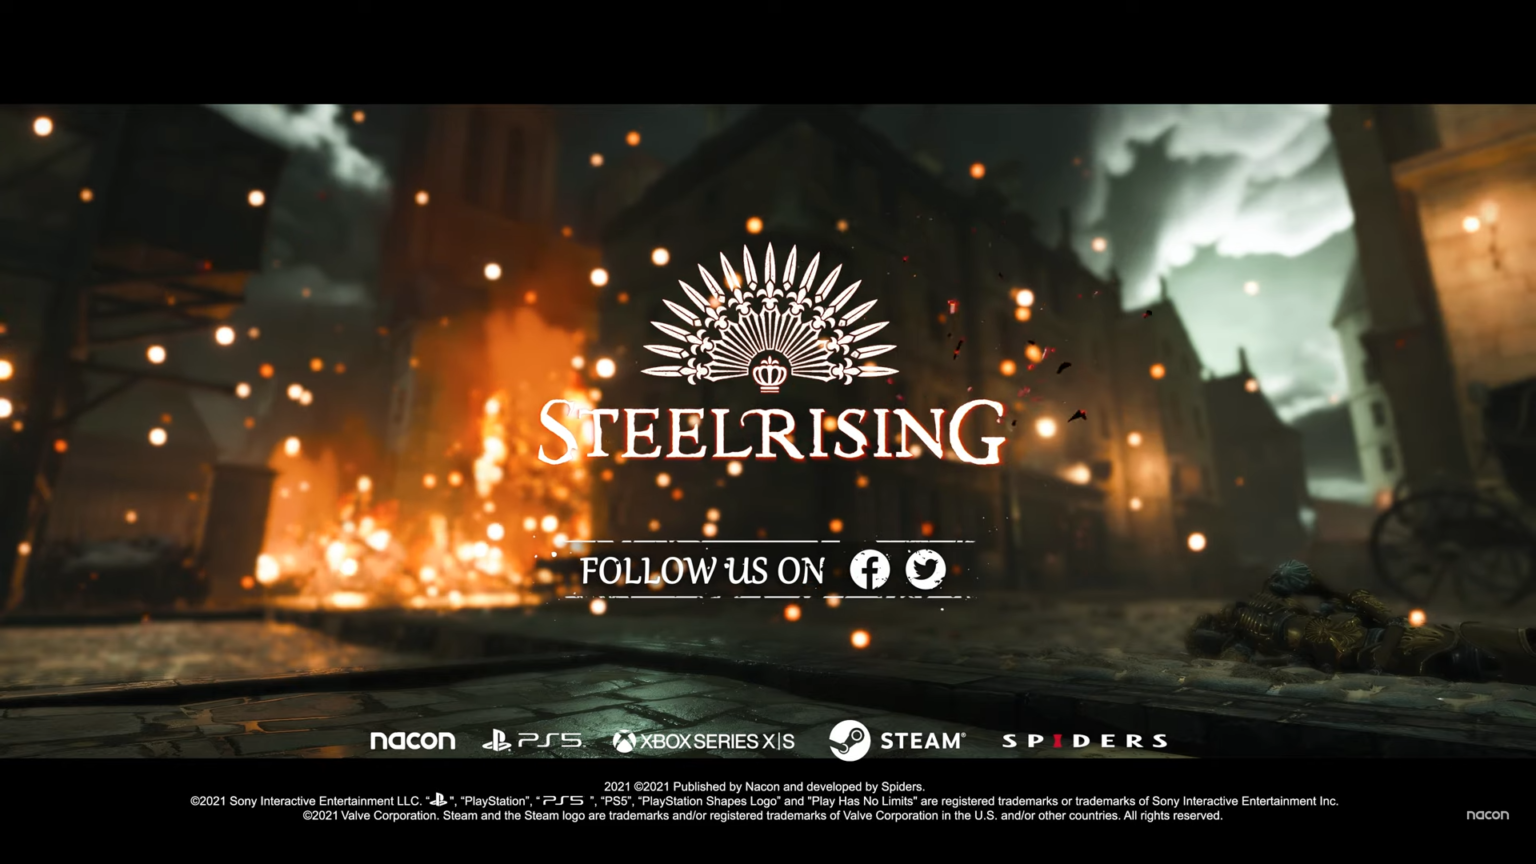 download the last version for windows Steelrising